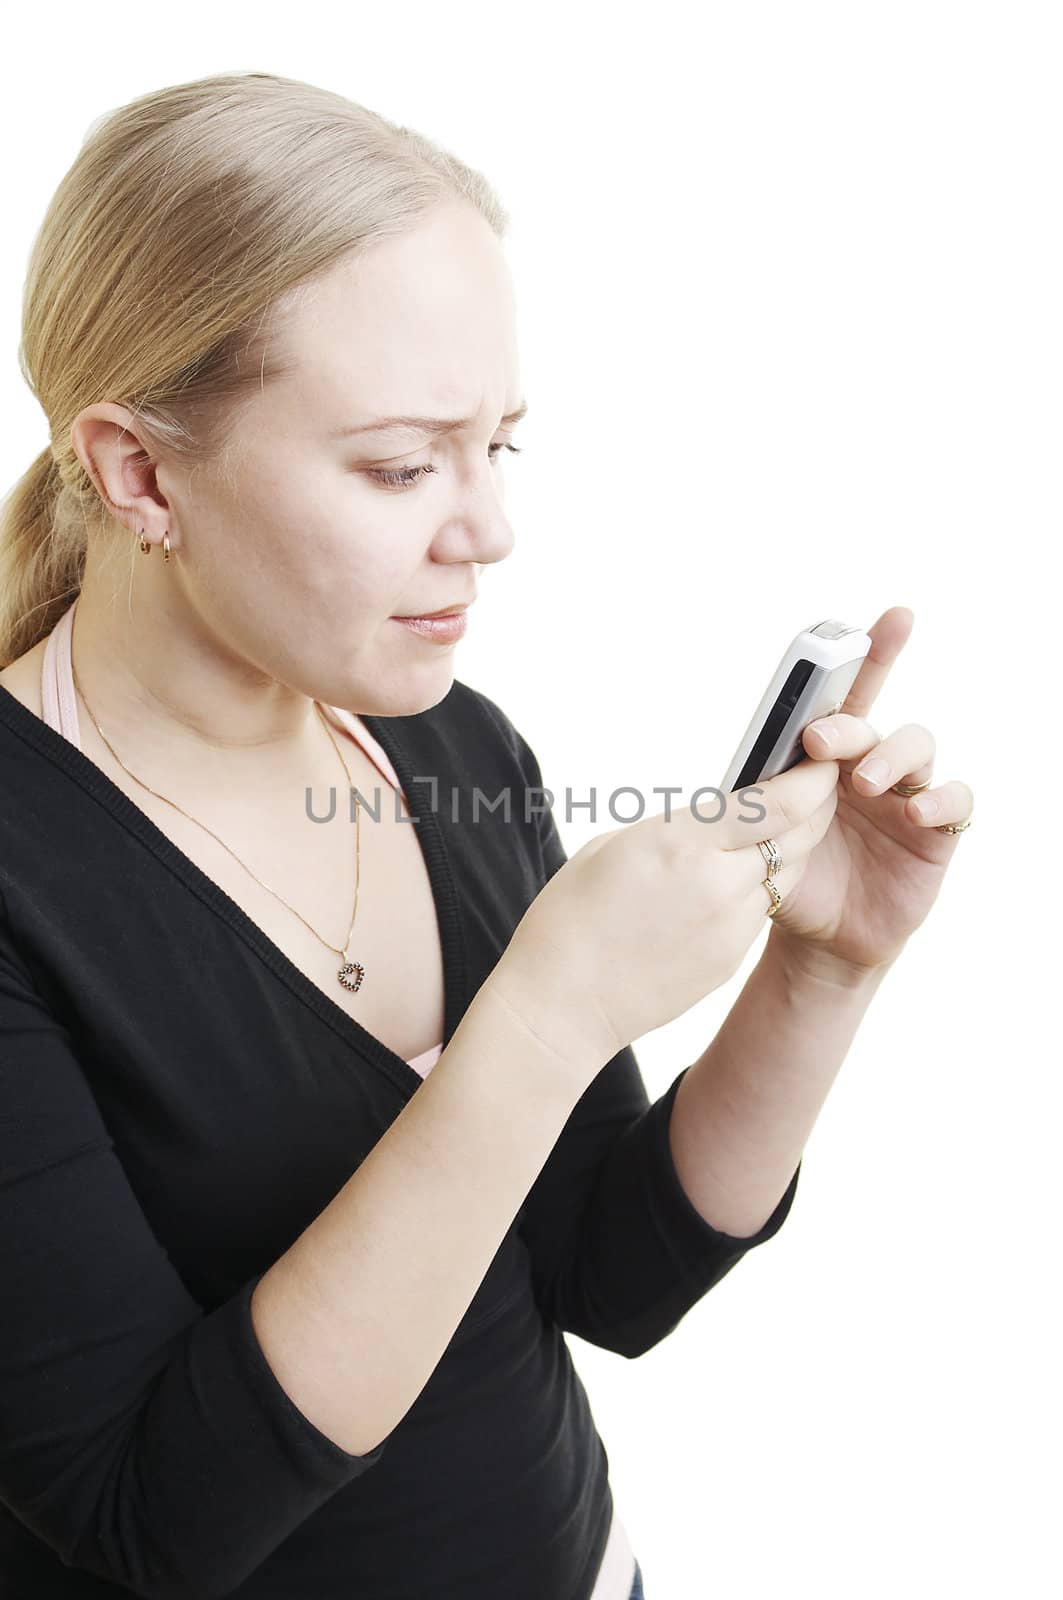 Woman sending a text message on the white background